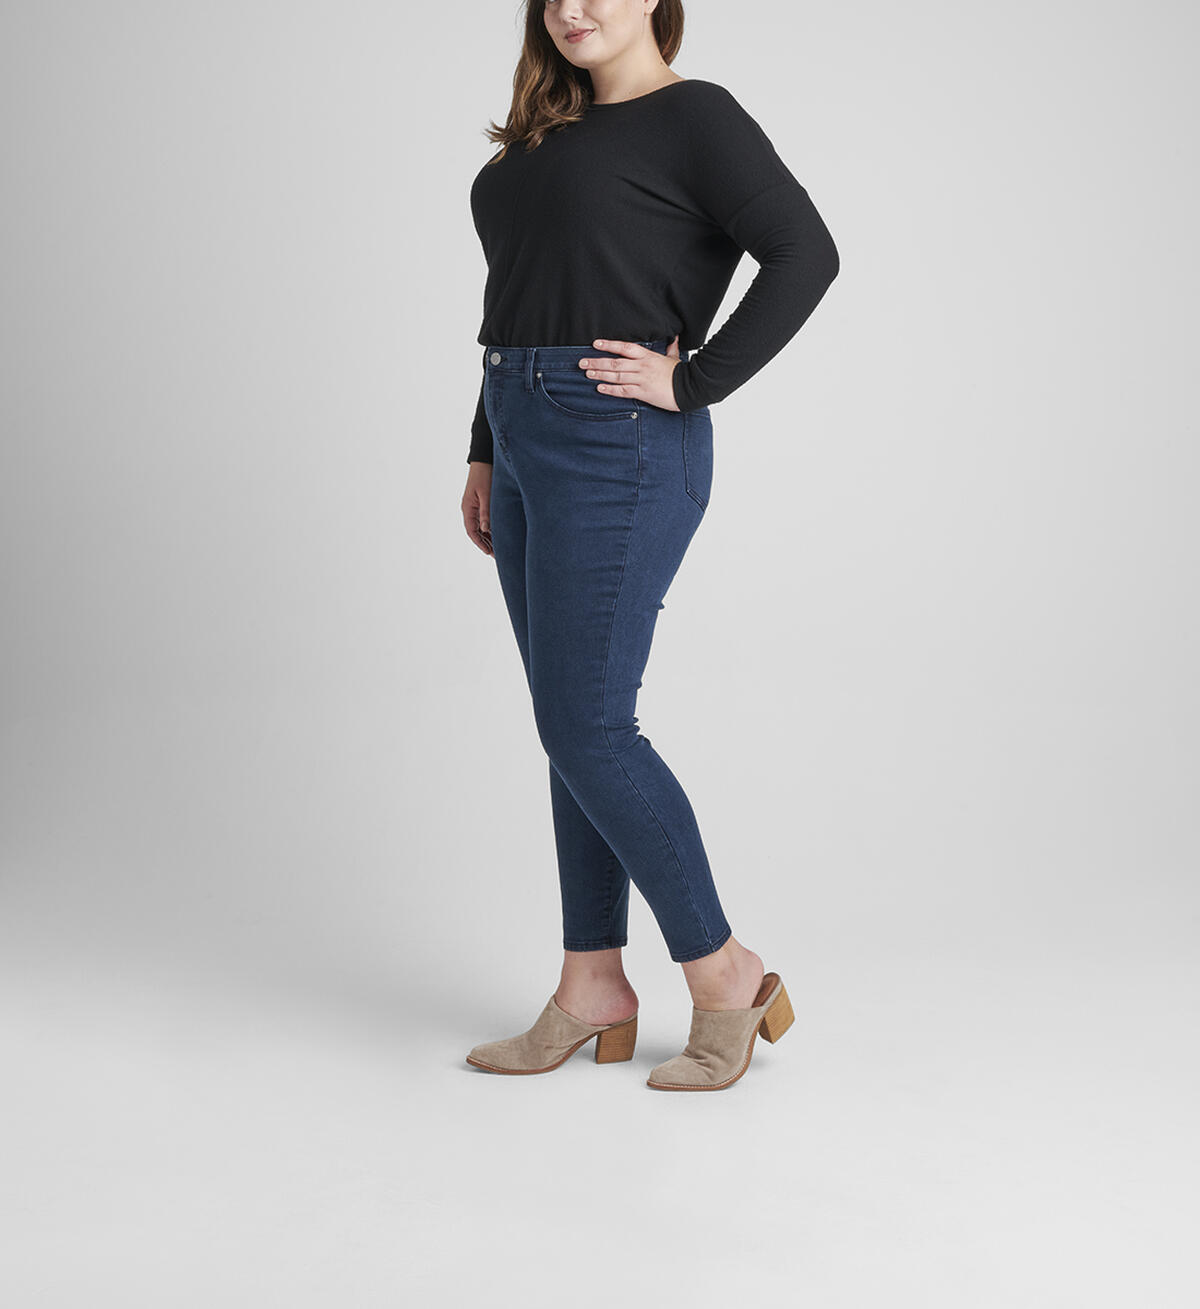 Cecilia High Rise Skinny Jeans Plus Size, , hi-res image number 2